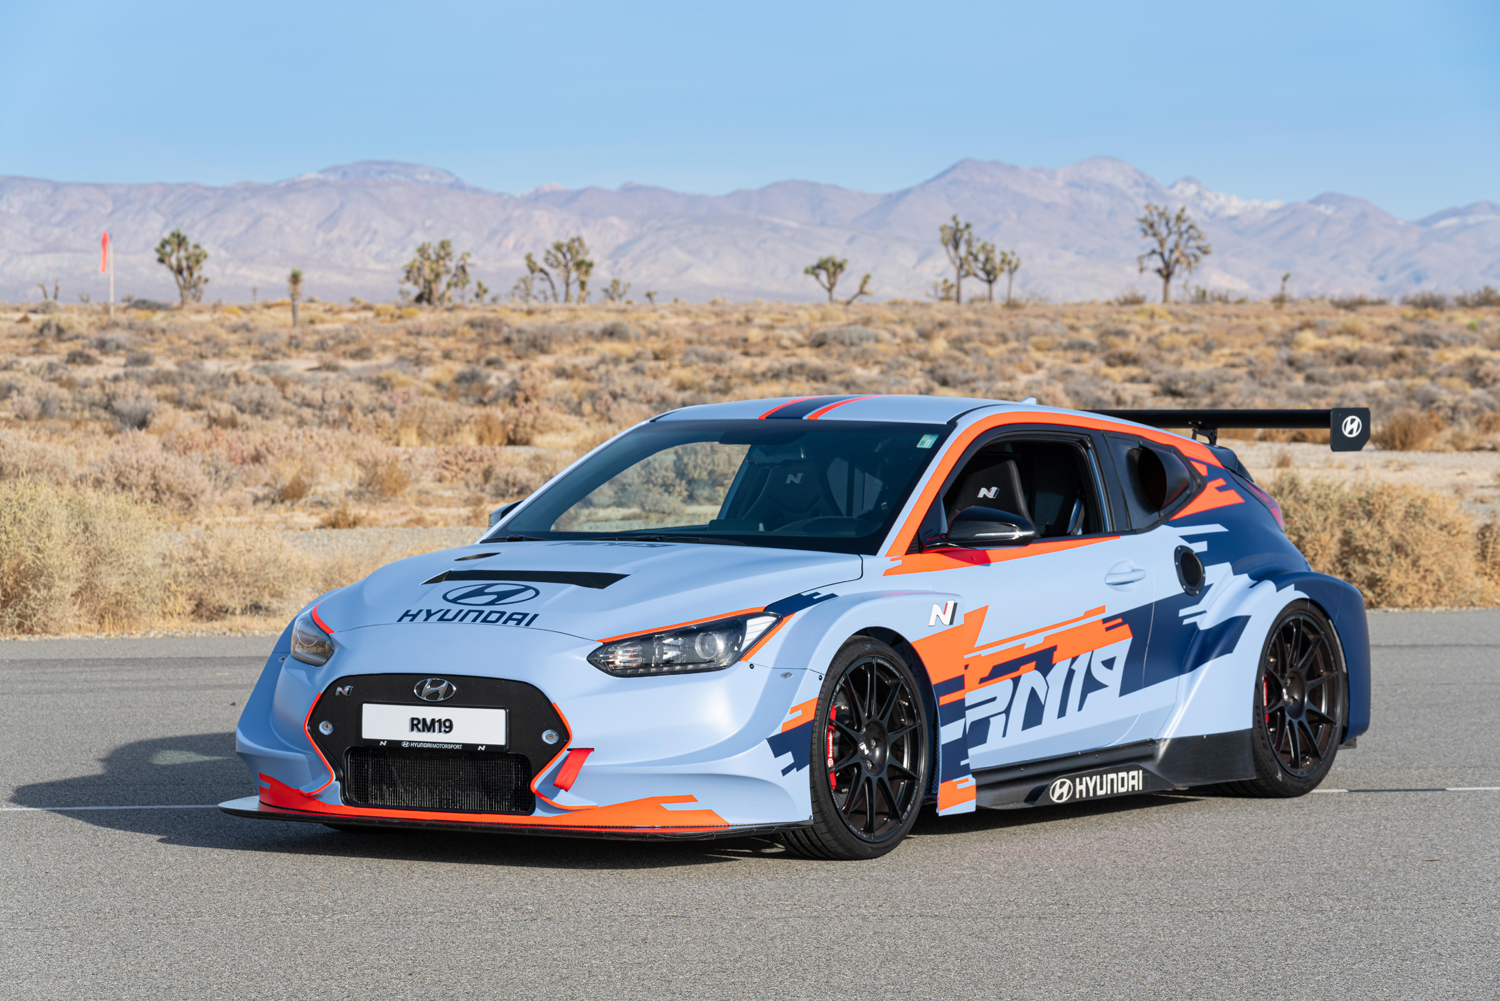 mid engined hyundai rm19 hot hatch unveiled at los angeles auto show 5